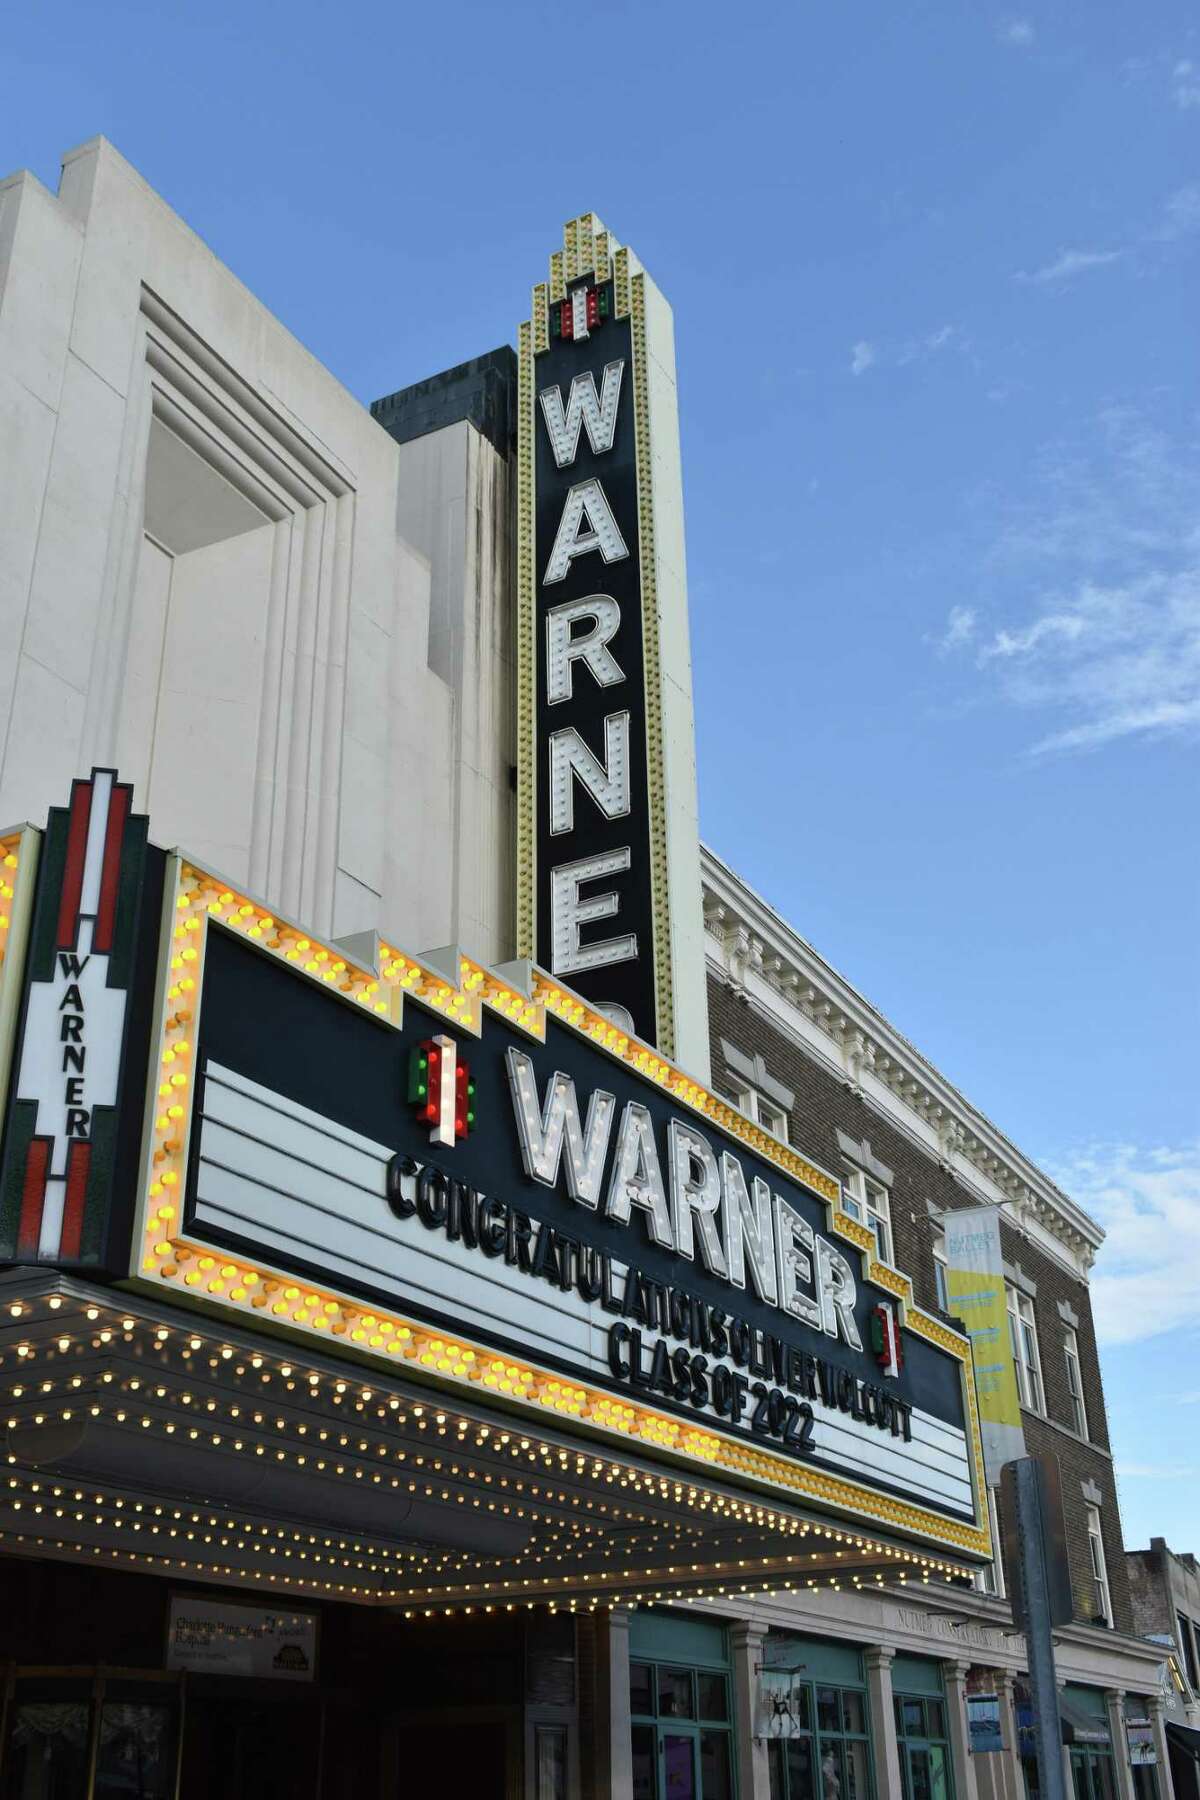 The Warner Theatre has tickets for its annual Wine & Food Tasting.